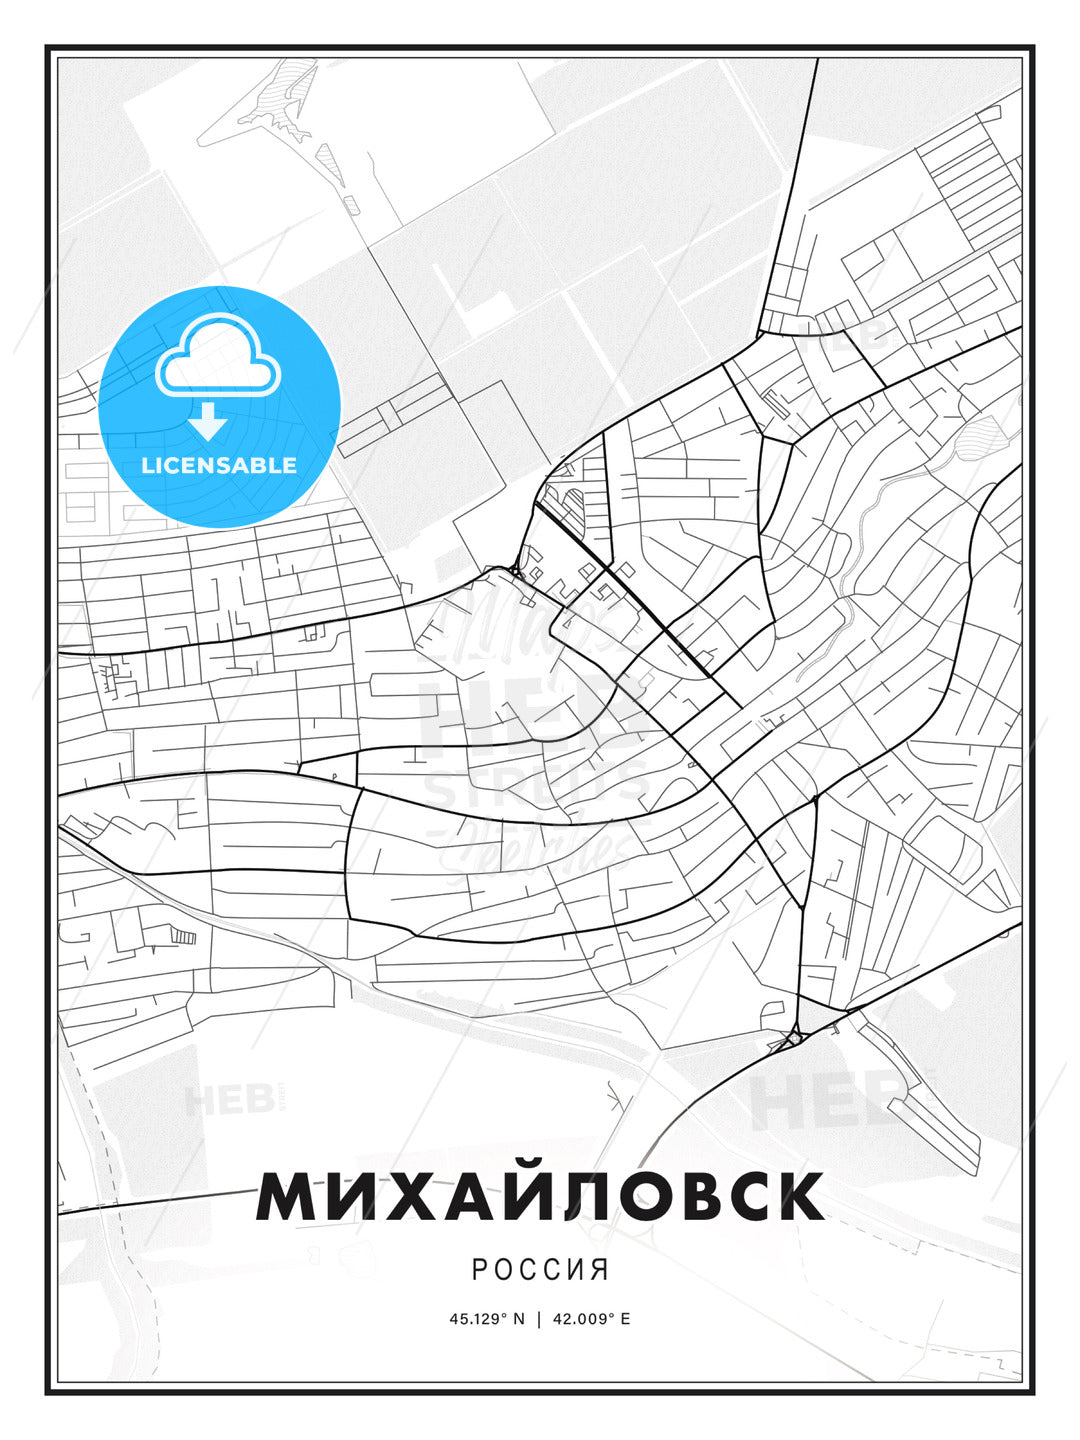 МИХАЙЛОВСК / Mikhaylovsk, Russia, Modern Print Template in Various Formats - HEBSTREITS Sketches